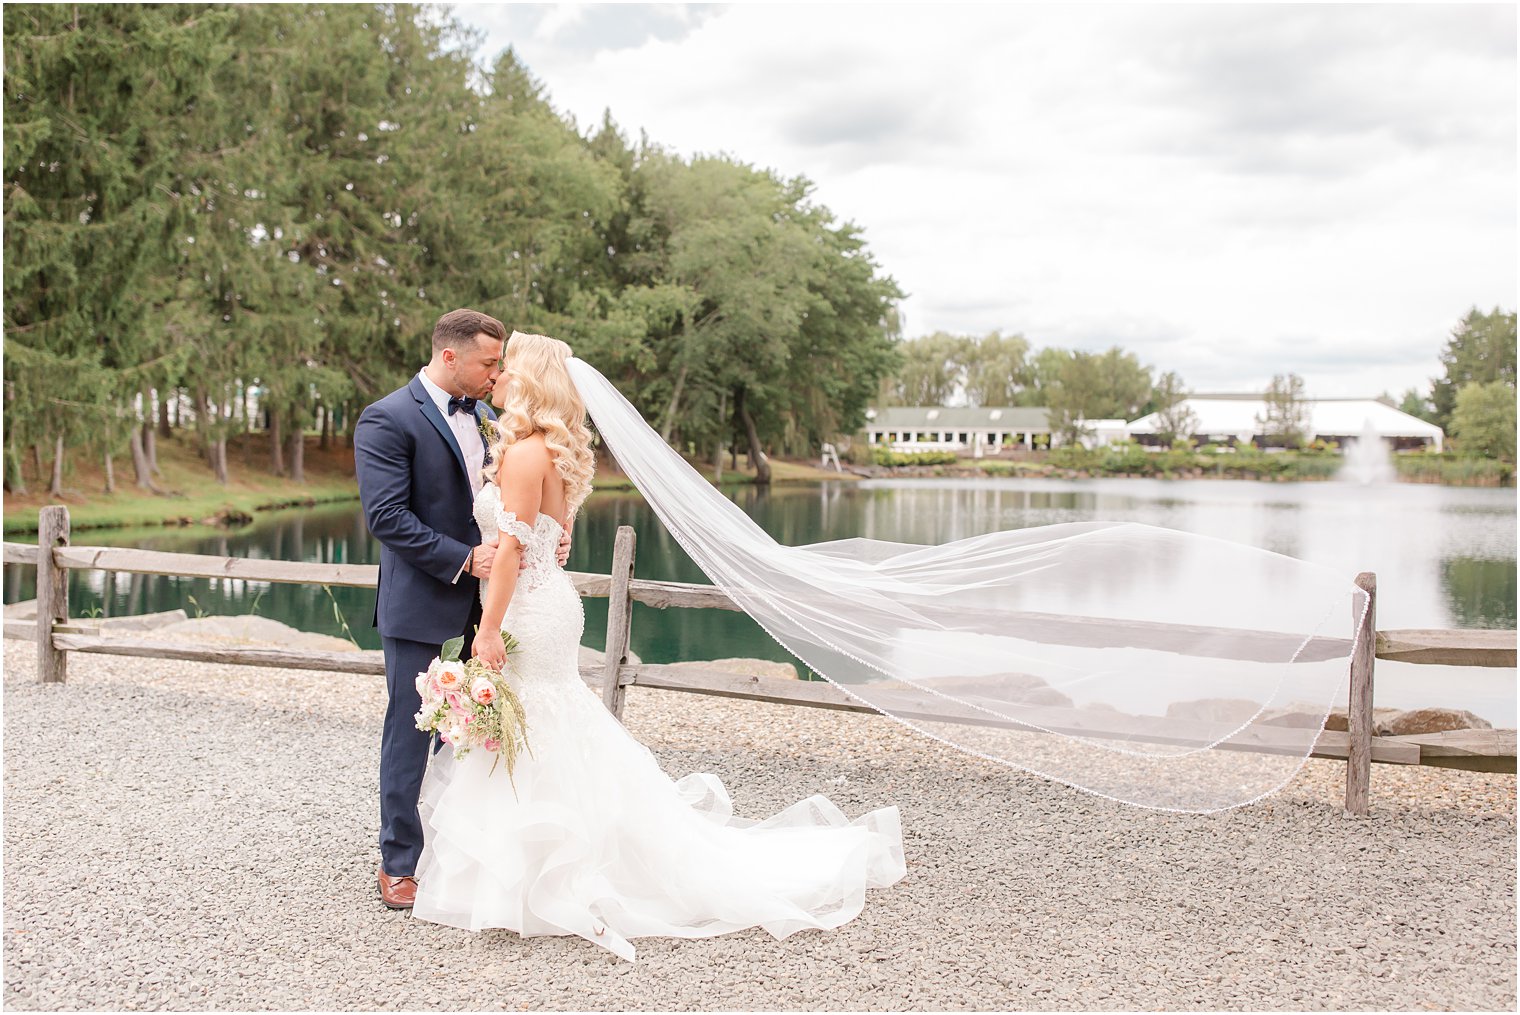 Romantic veil photo at Windows on the Water at Frogbridge